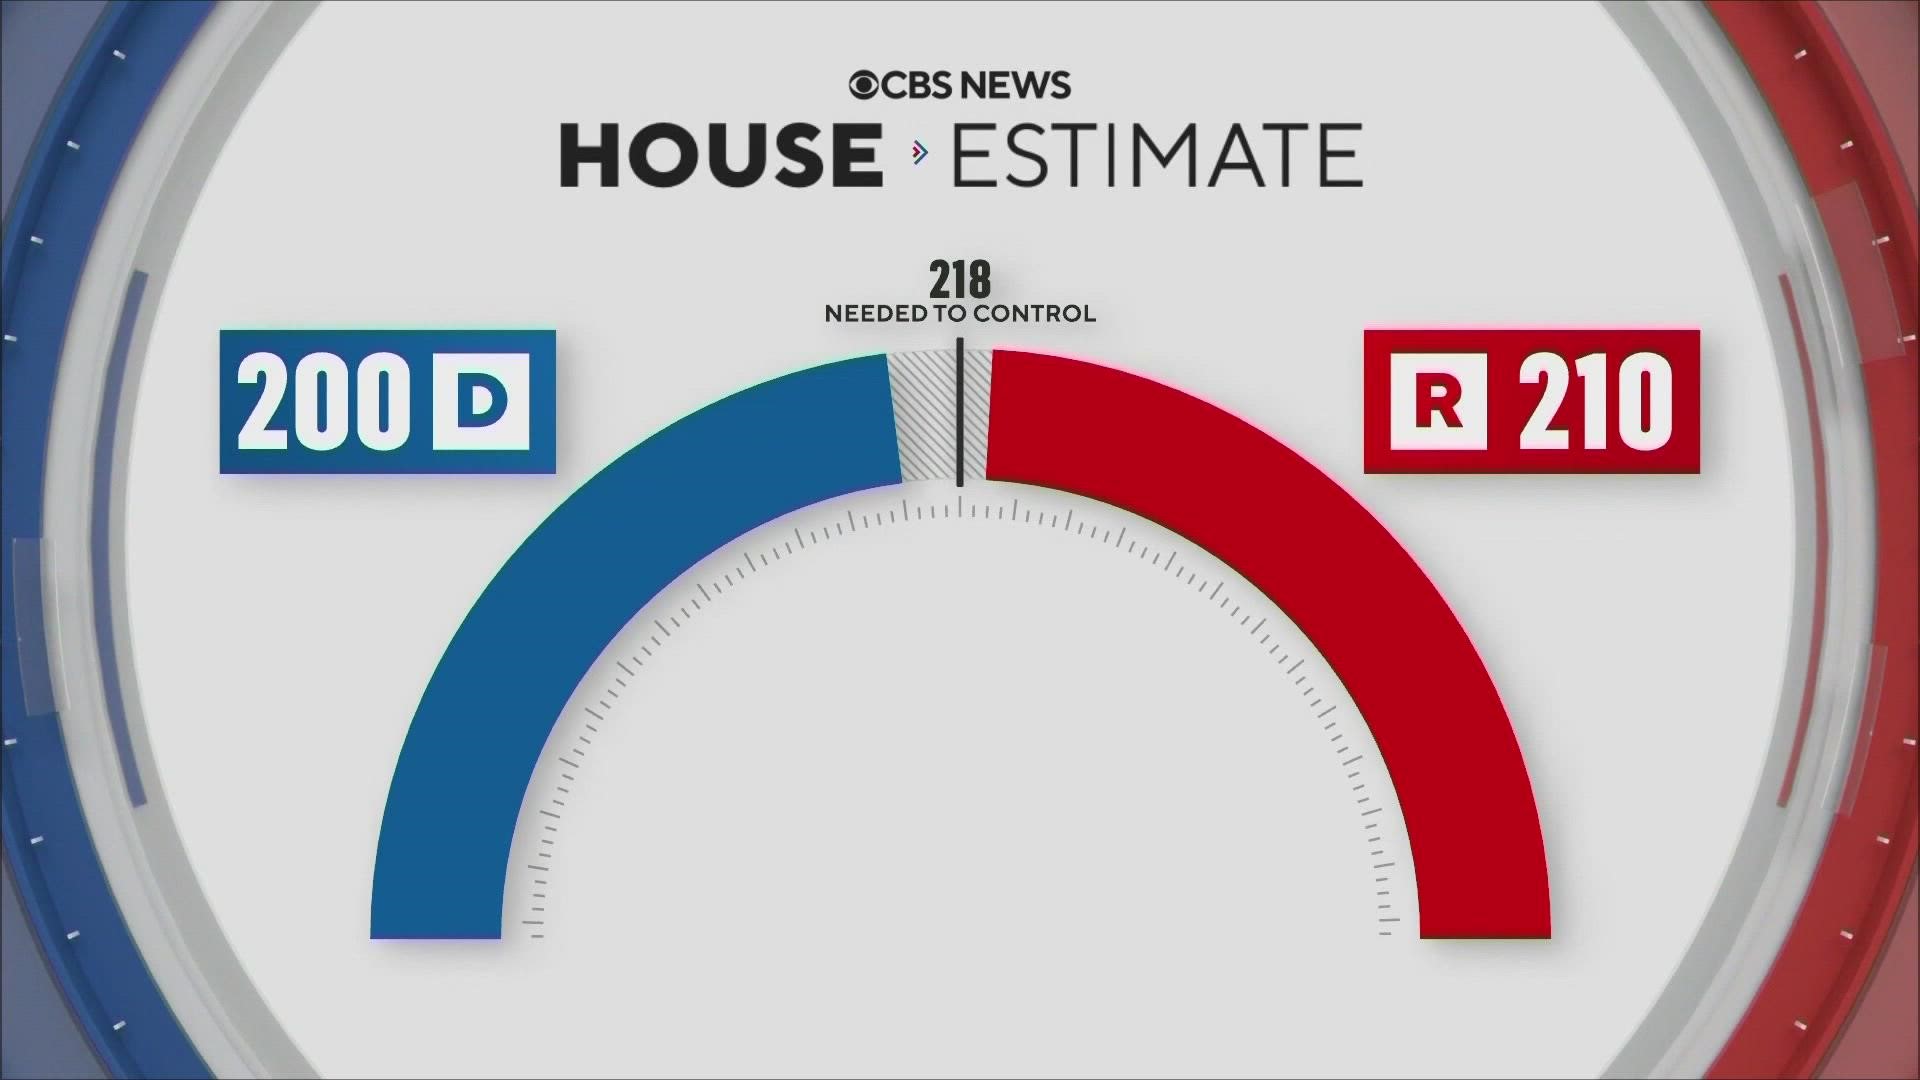 President Biden praised the democratic party for holding up against the projected red wave, but CBS news projects the house could still go to the republicans.